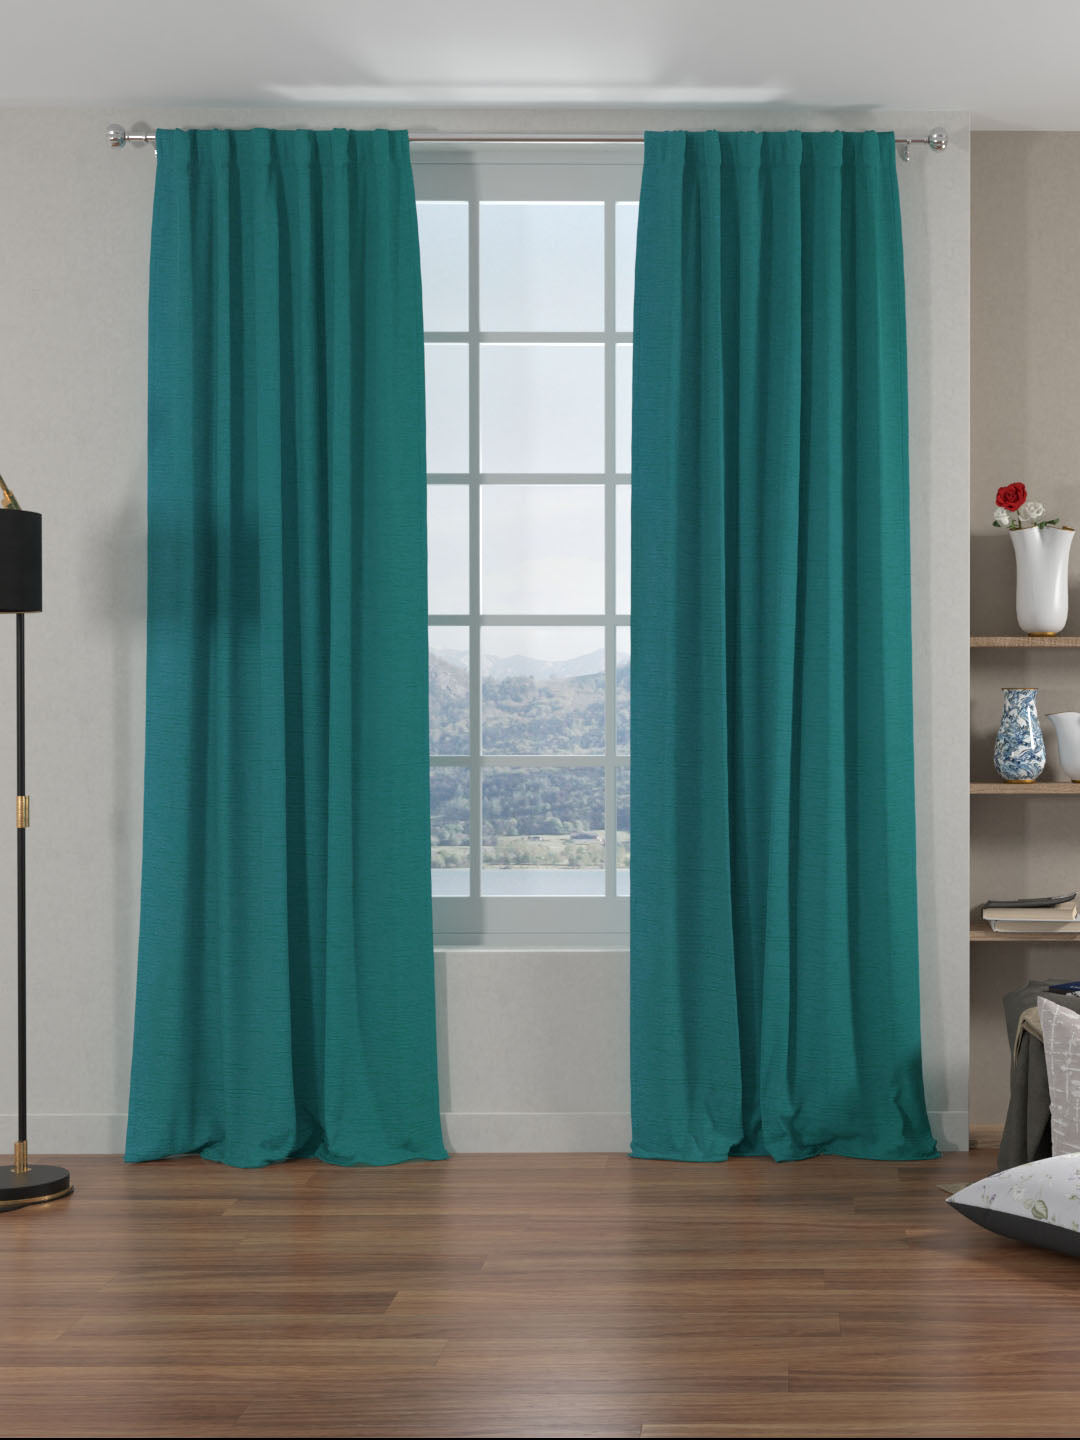 Grace Solids Opus 9 Ft Polyester Door Curtains Set Of 2 (Seagreen)